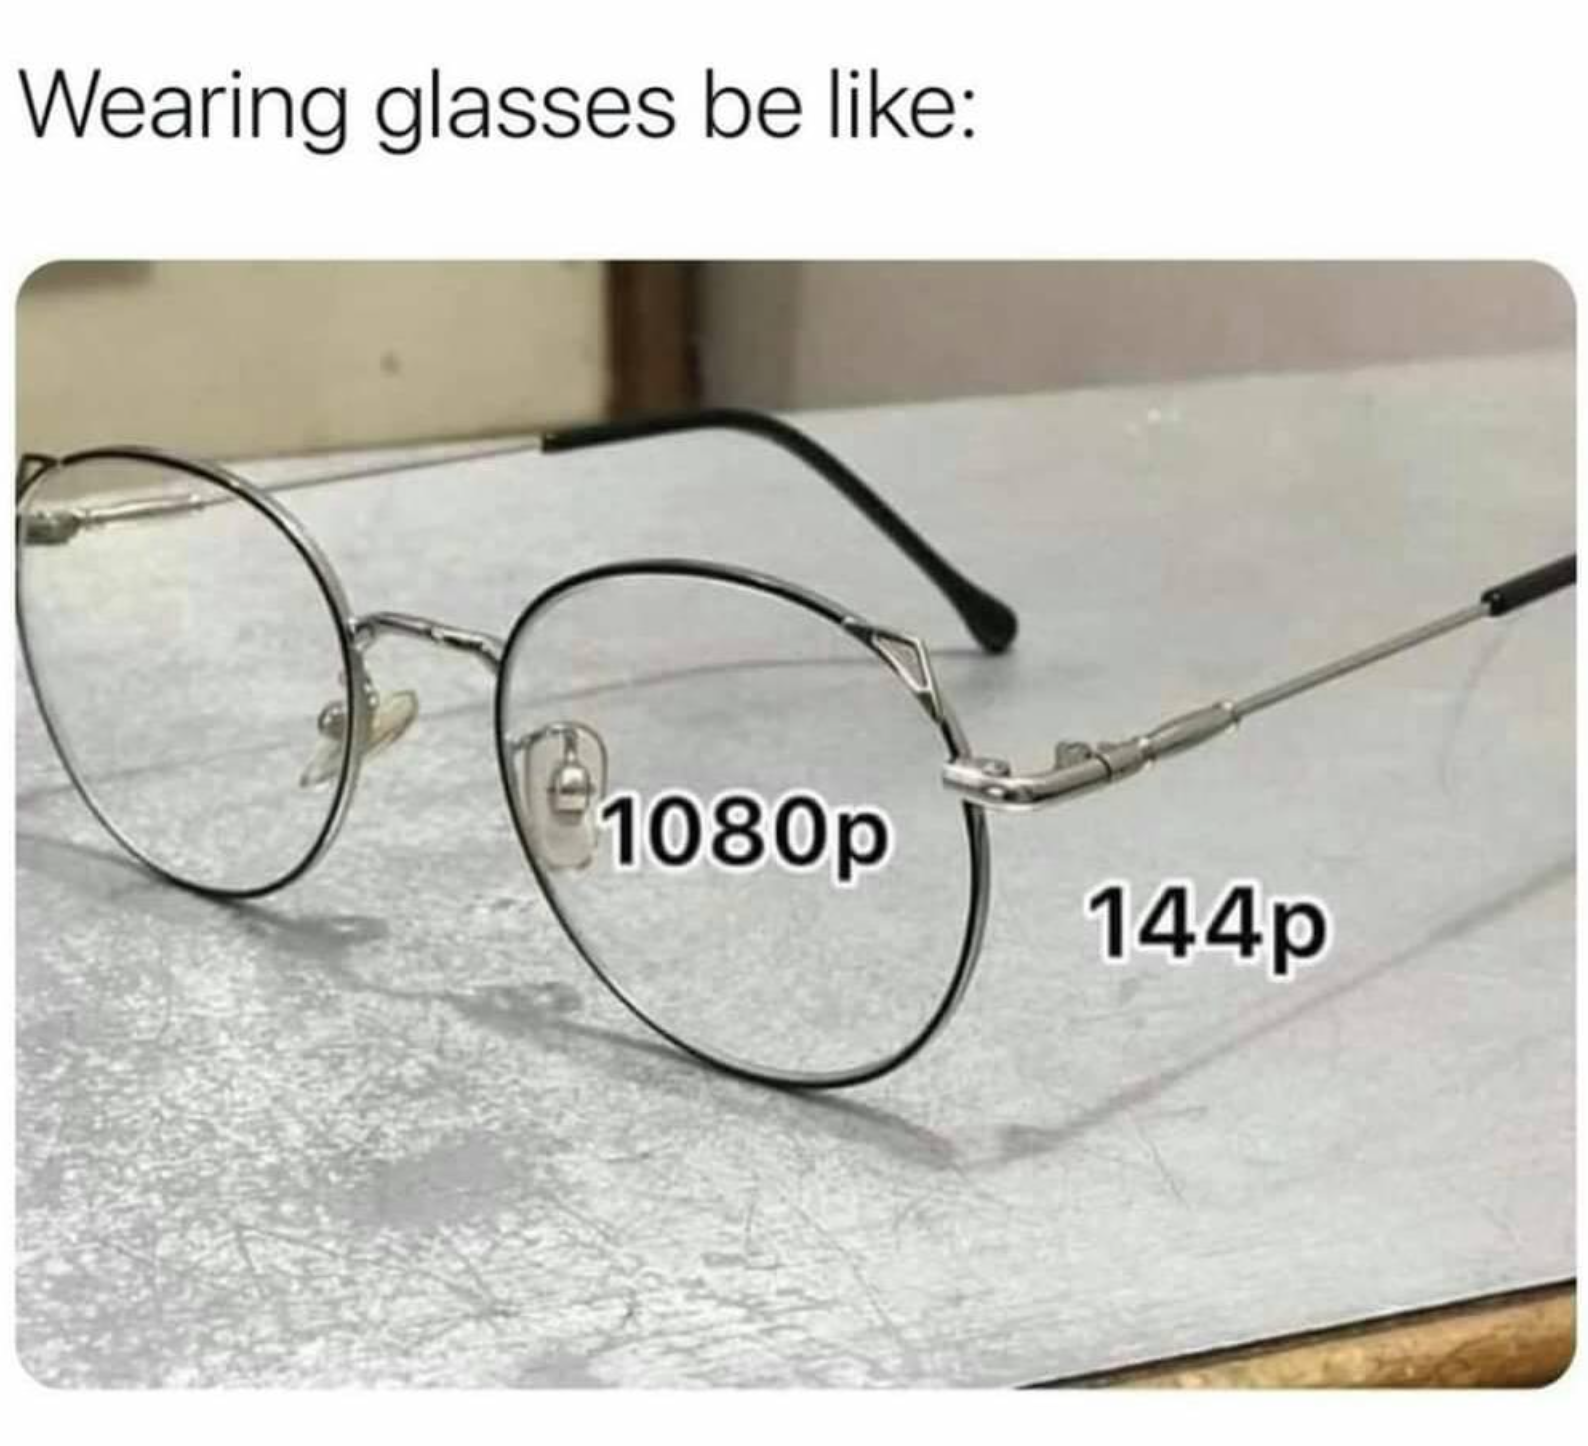 goggles 144p and 1080p - Wearing glasses be 1080p 144p